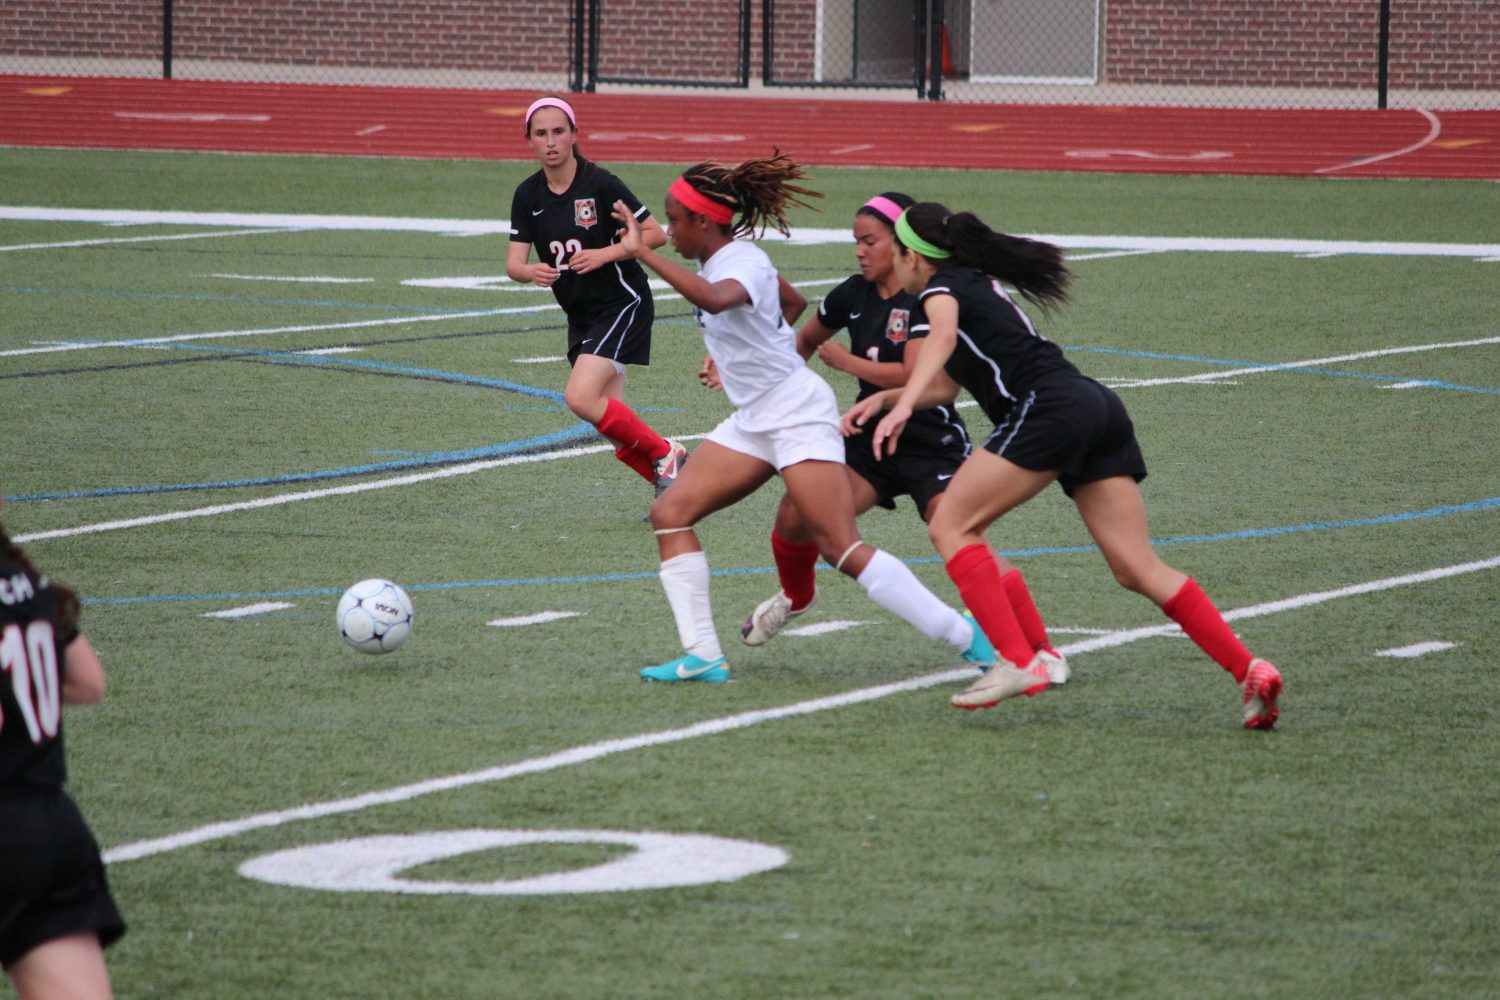 Varsity+soccer+defeats+Parkway+Central+3-0+in+District+Championship+%5Bslideshow%5D